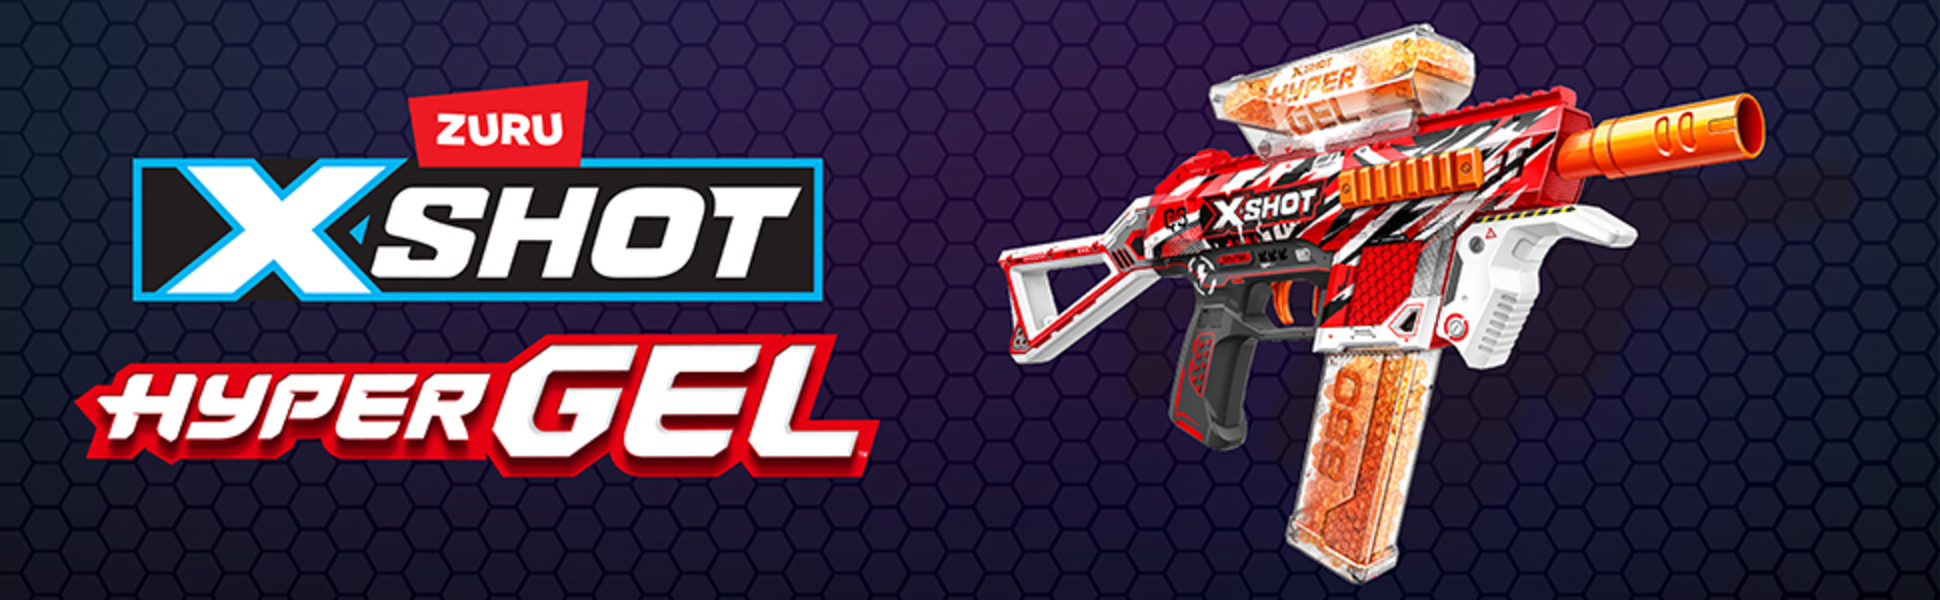  XShot Hyper Gel Trace Fire Blaster, Semi and Fully Automatic Gel  Blaster & 10,000 Gellets, 600 Capacity Hopper & 850 Capacity Mag, Ages 14 &  Up by ZURU : Toys & Games